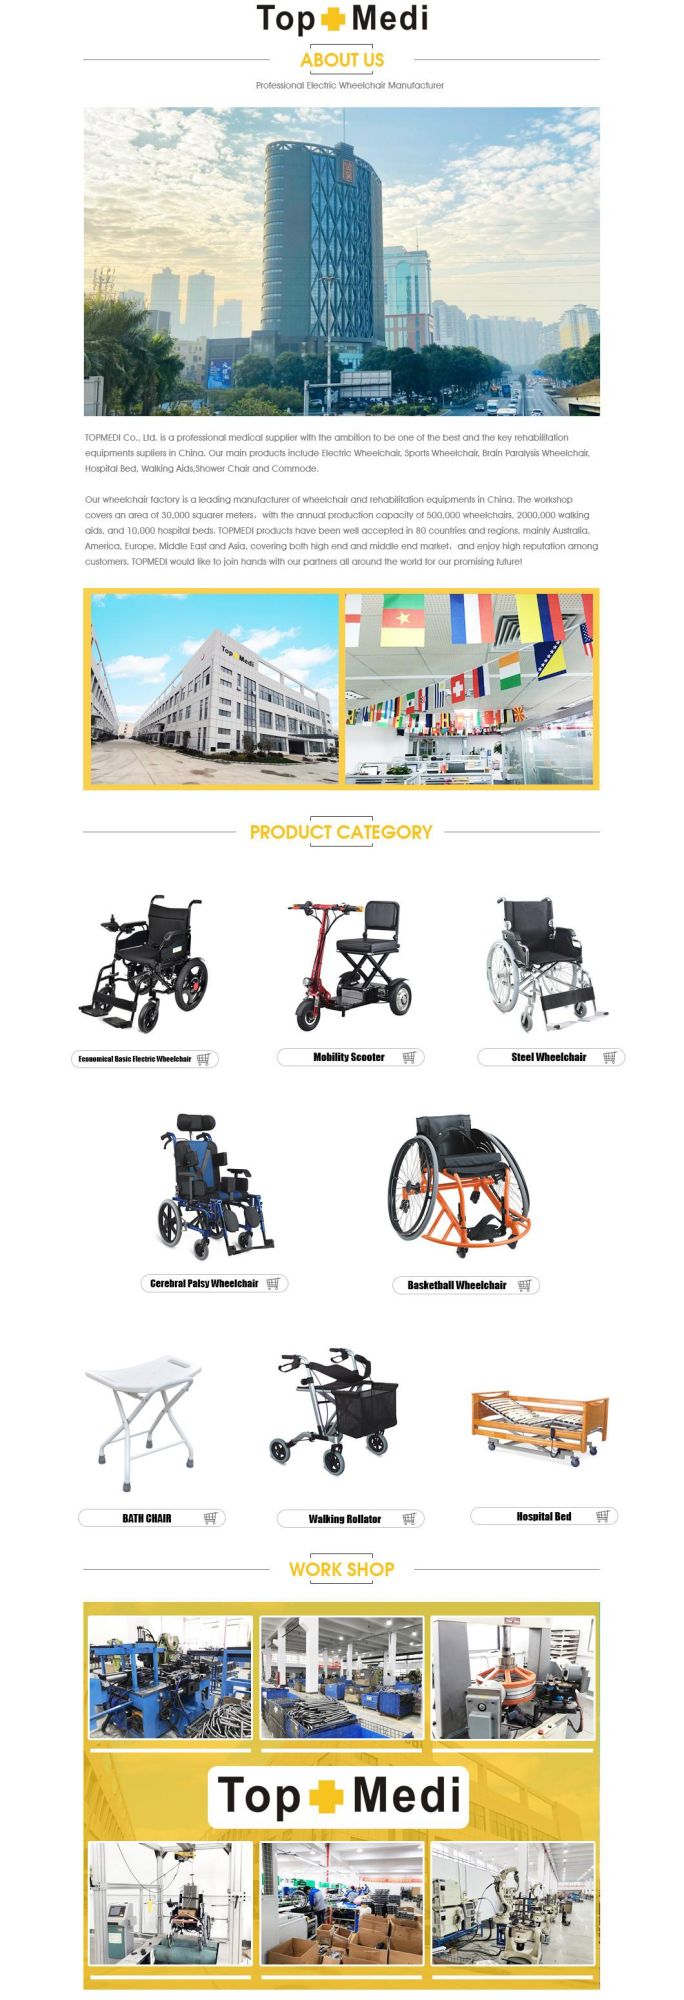 Good Price Customized Multi-Function Chair Bedside Shiwer Auutomatic Commade Wheelchair Toilet Commode Tcm-01b